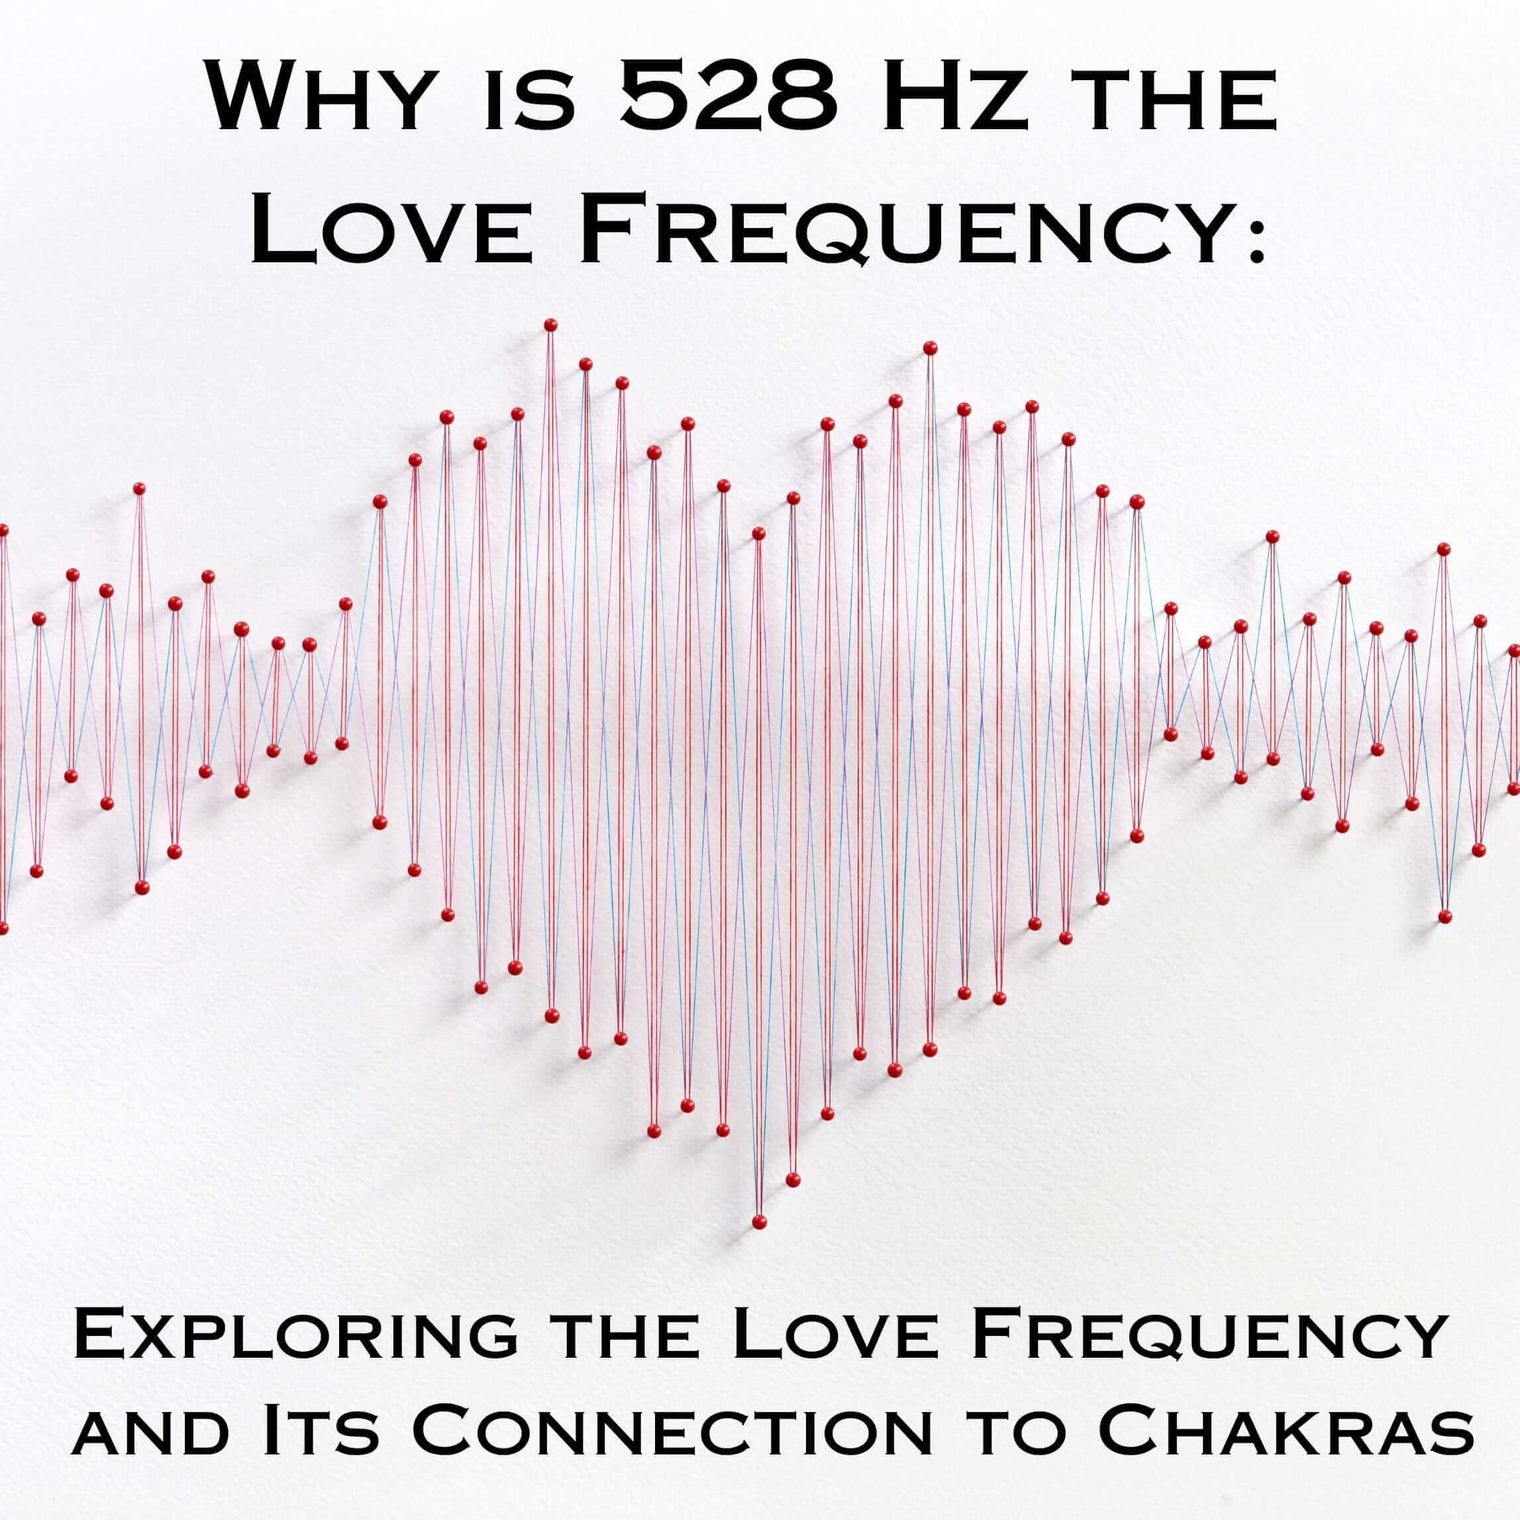 Why is 528 Hz the Love Frequency: Exploring the Love Frequency and Its Connection to Chakras